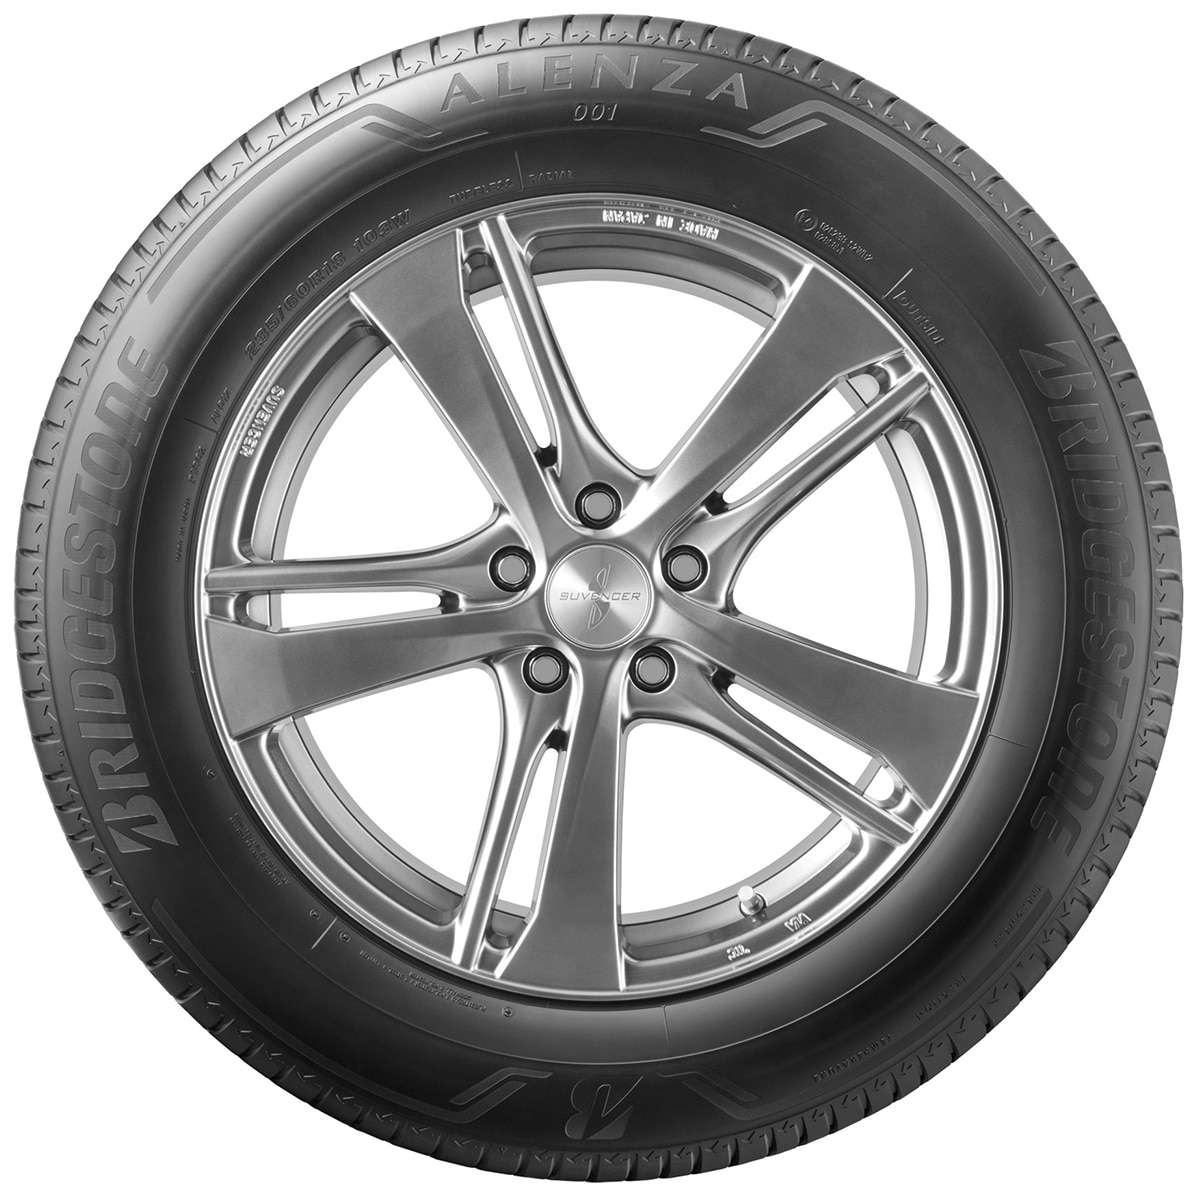 235/65R18 106V BS A001 - Tyre